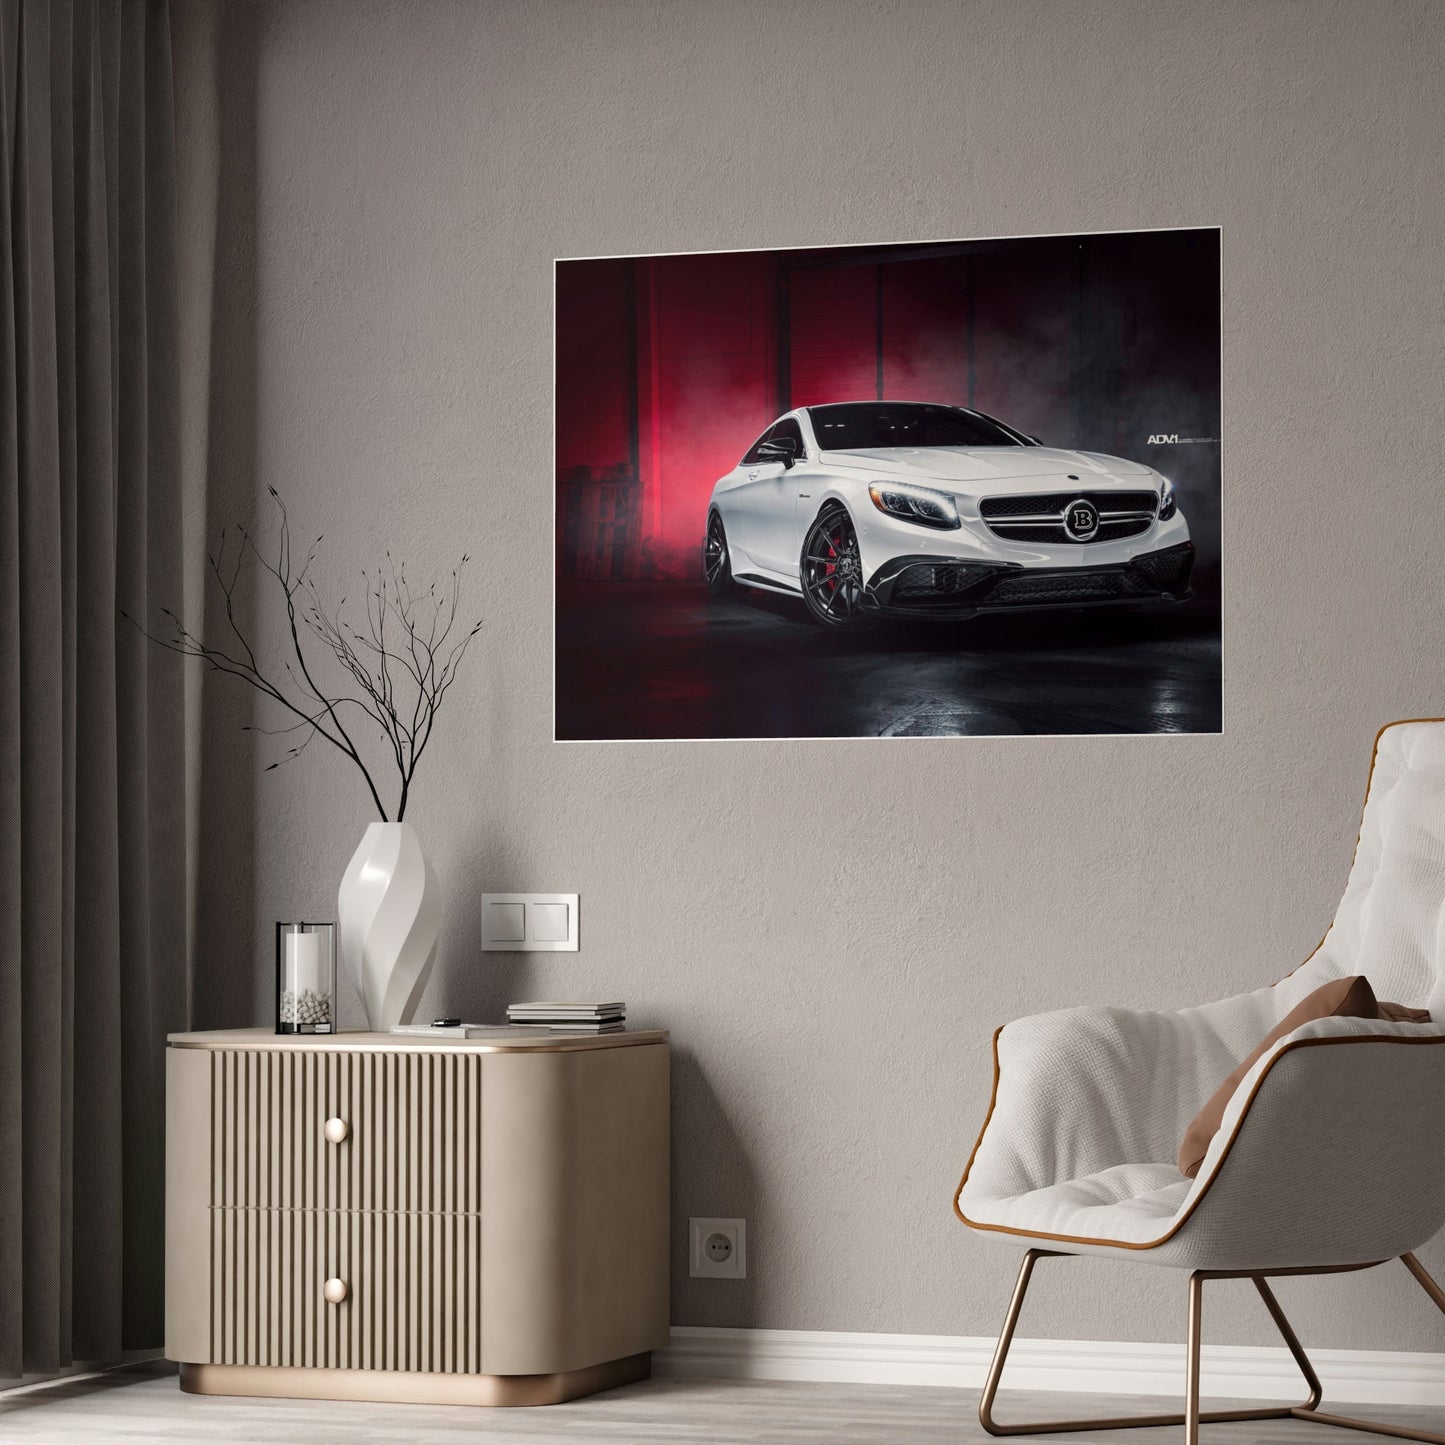 The Power of Brabus: Poster & Canvas Print for Car Enthusiasts